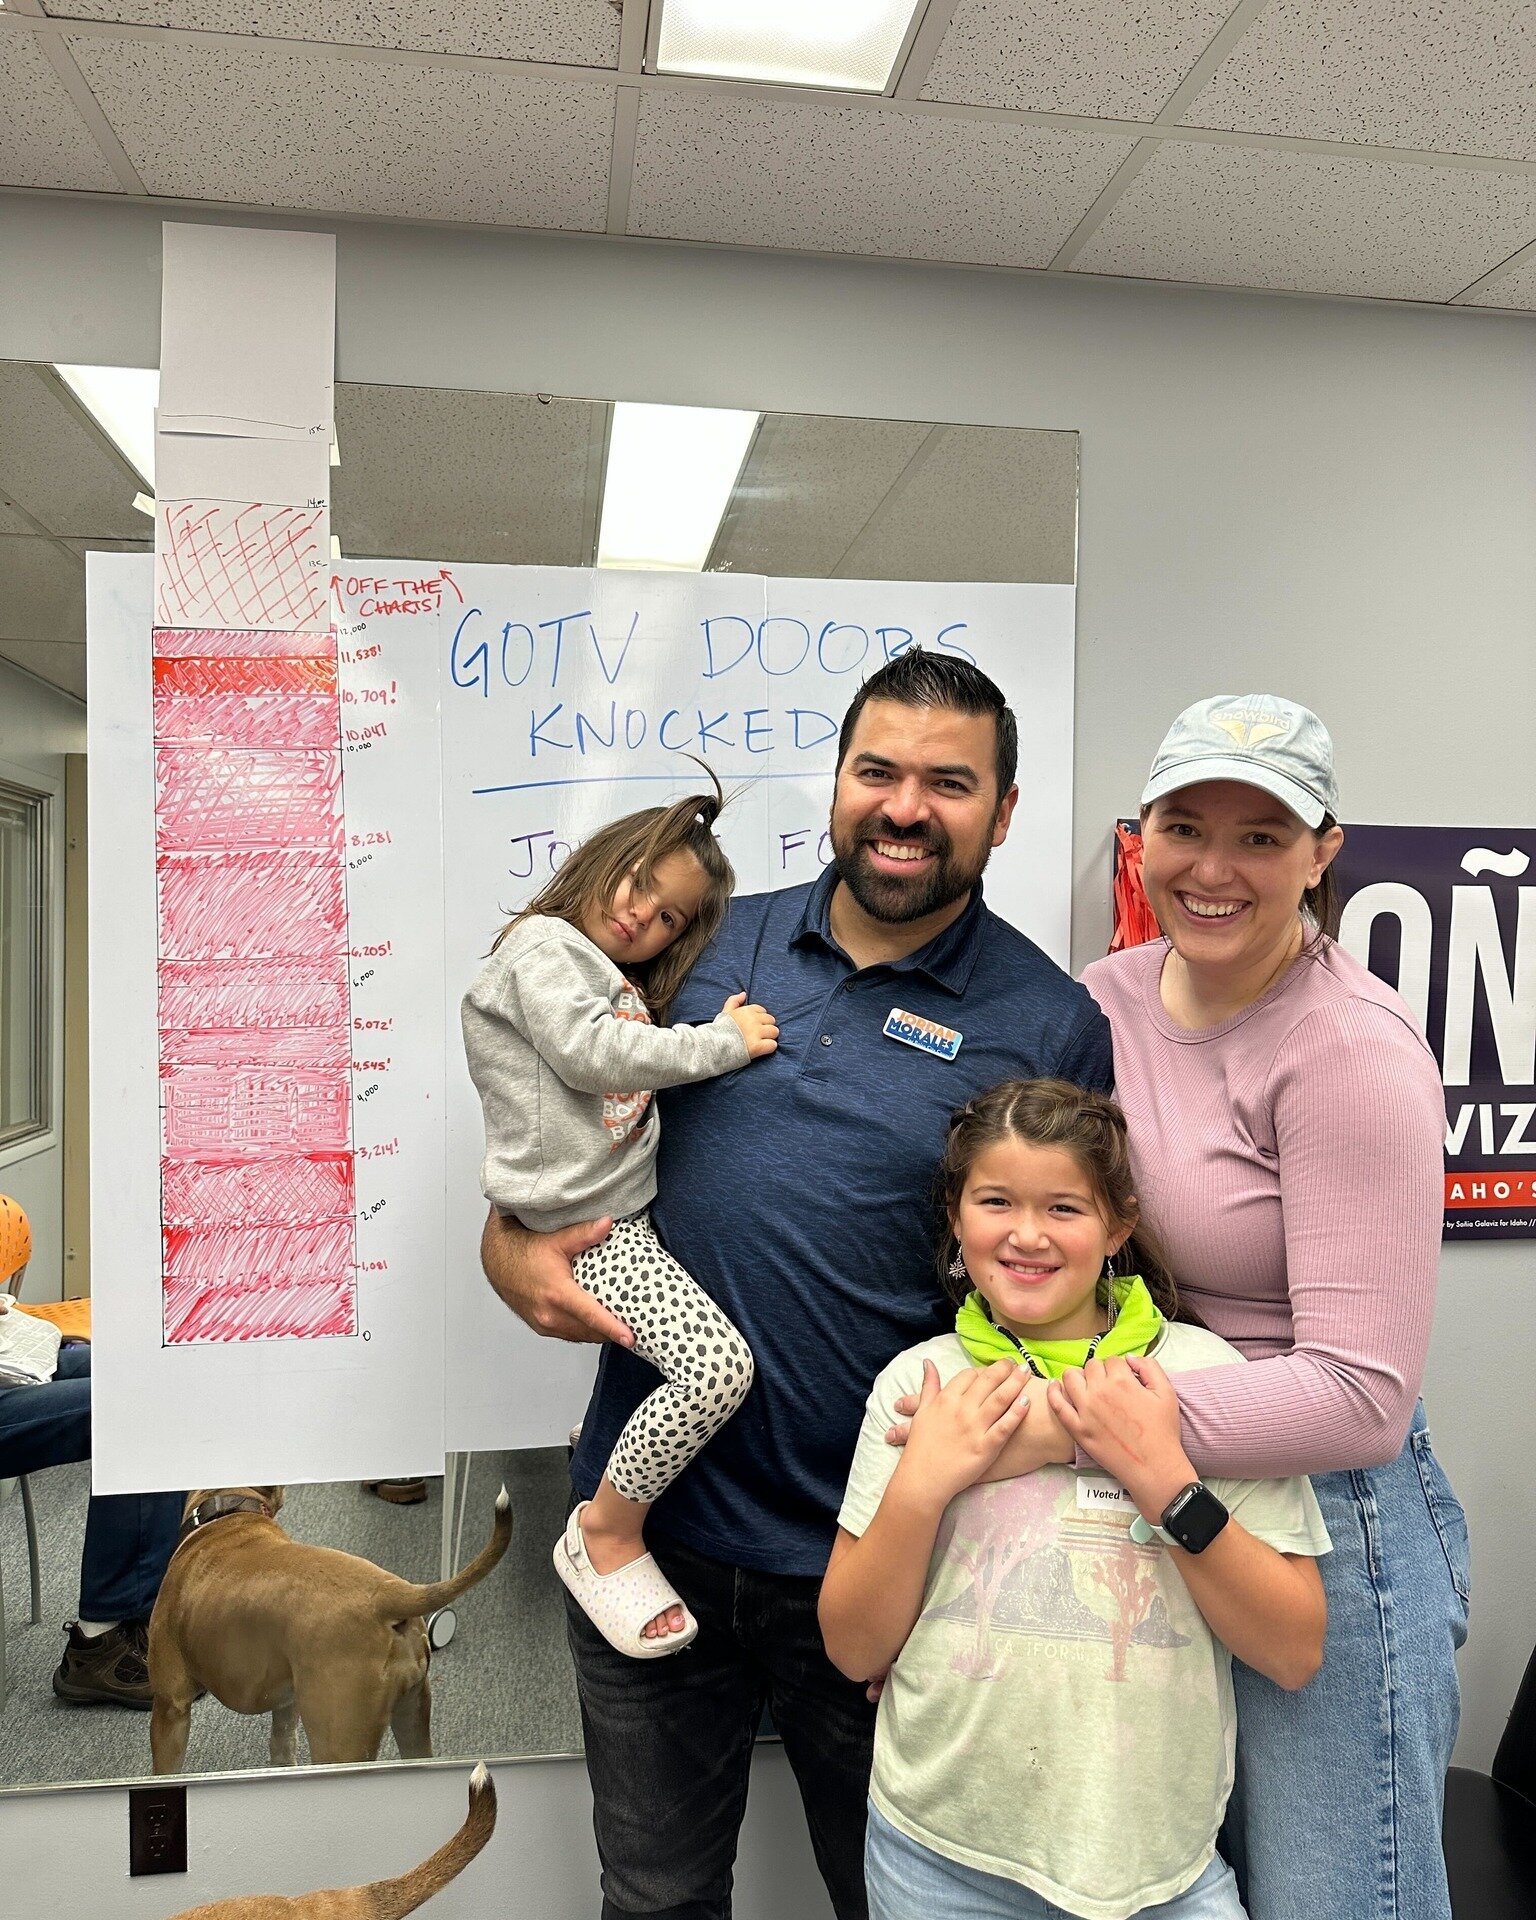 Crushing our Get Out the Vote goals! Over 14k doors and counting. 💪

We'll be knocking and calling folks right up to when the polls close at 8PM tonight. If you haven't already voted, it's GO time!